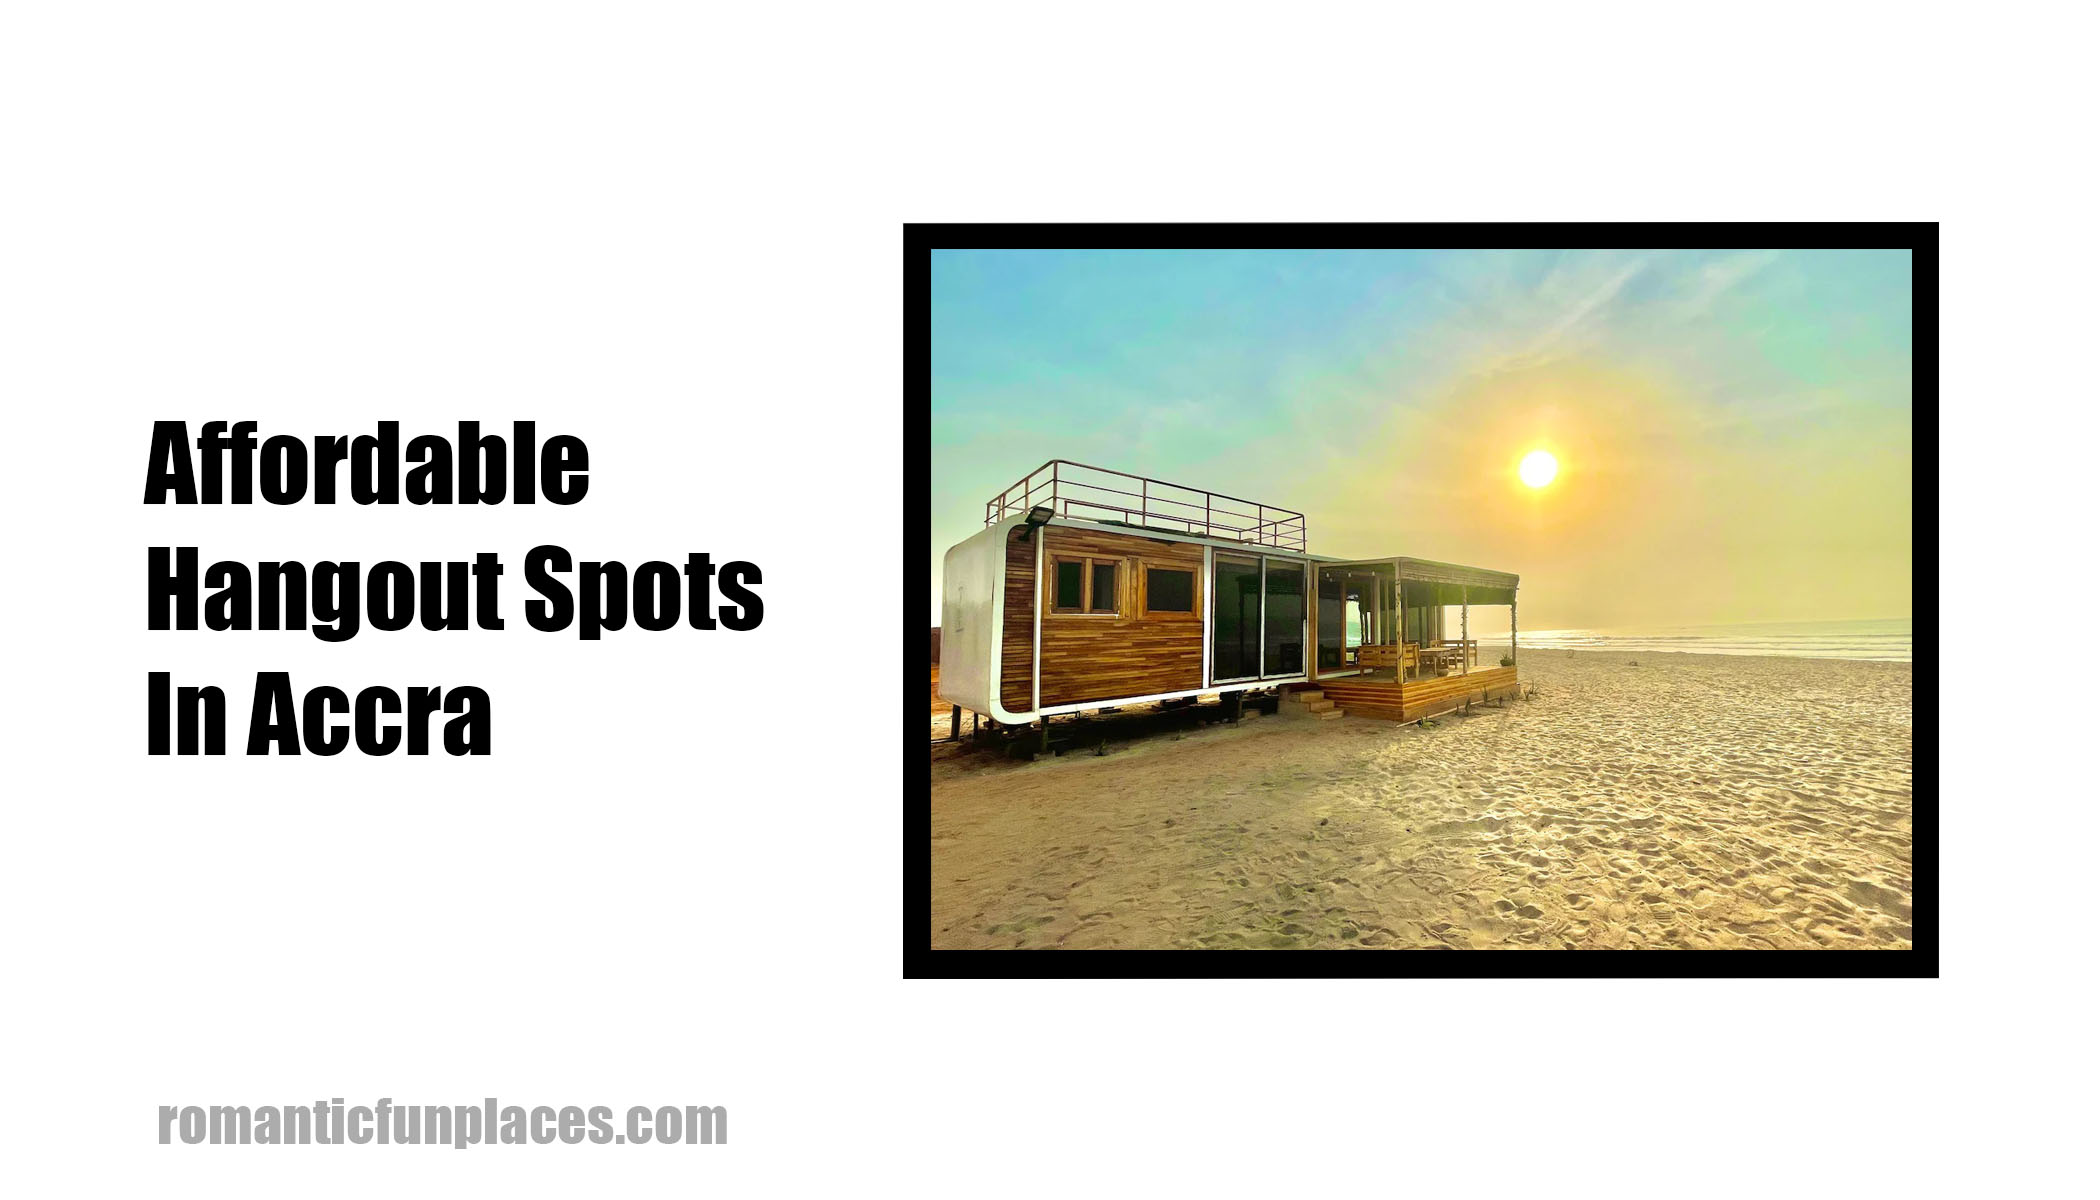 Affordable Hangout Spots In Accra